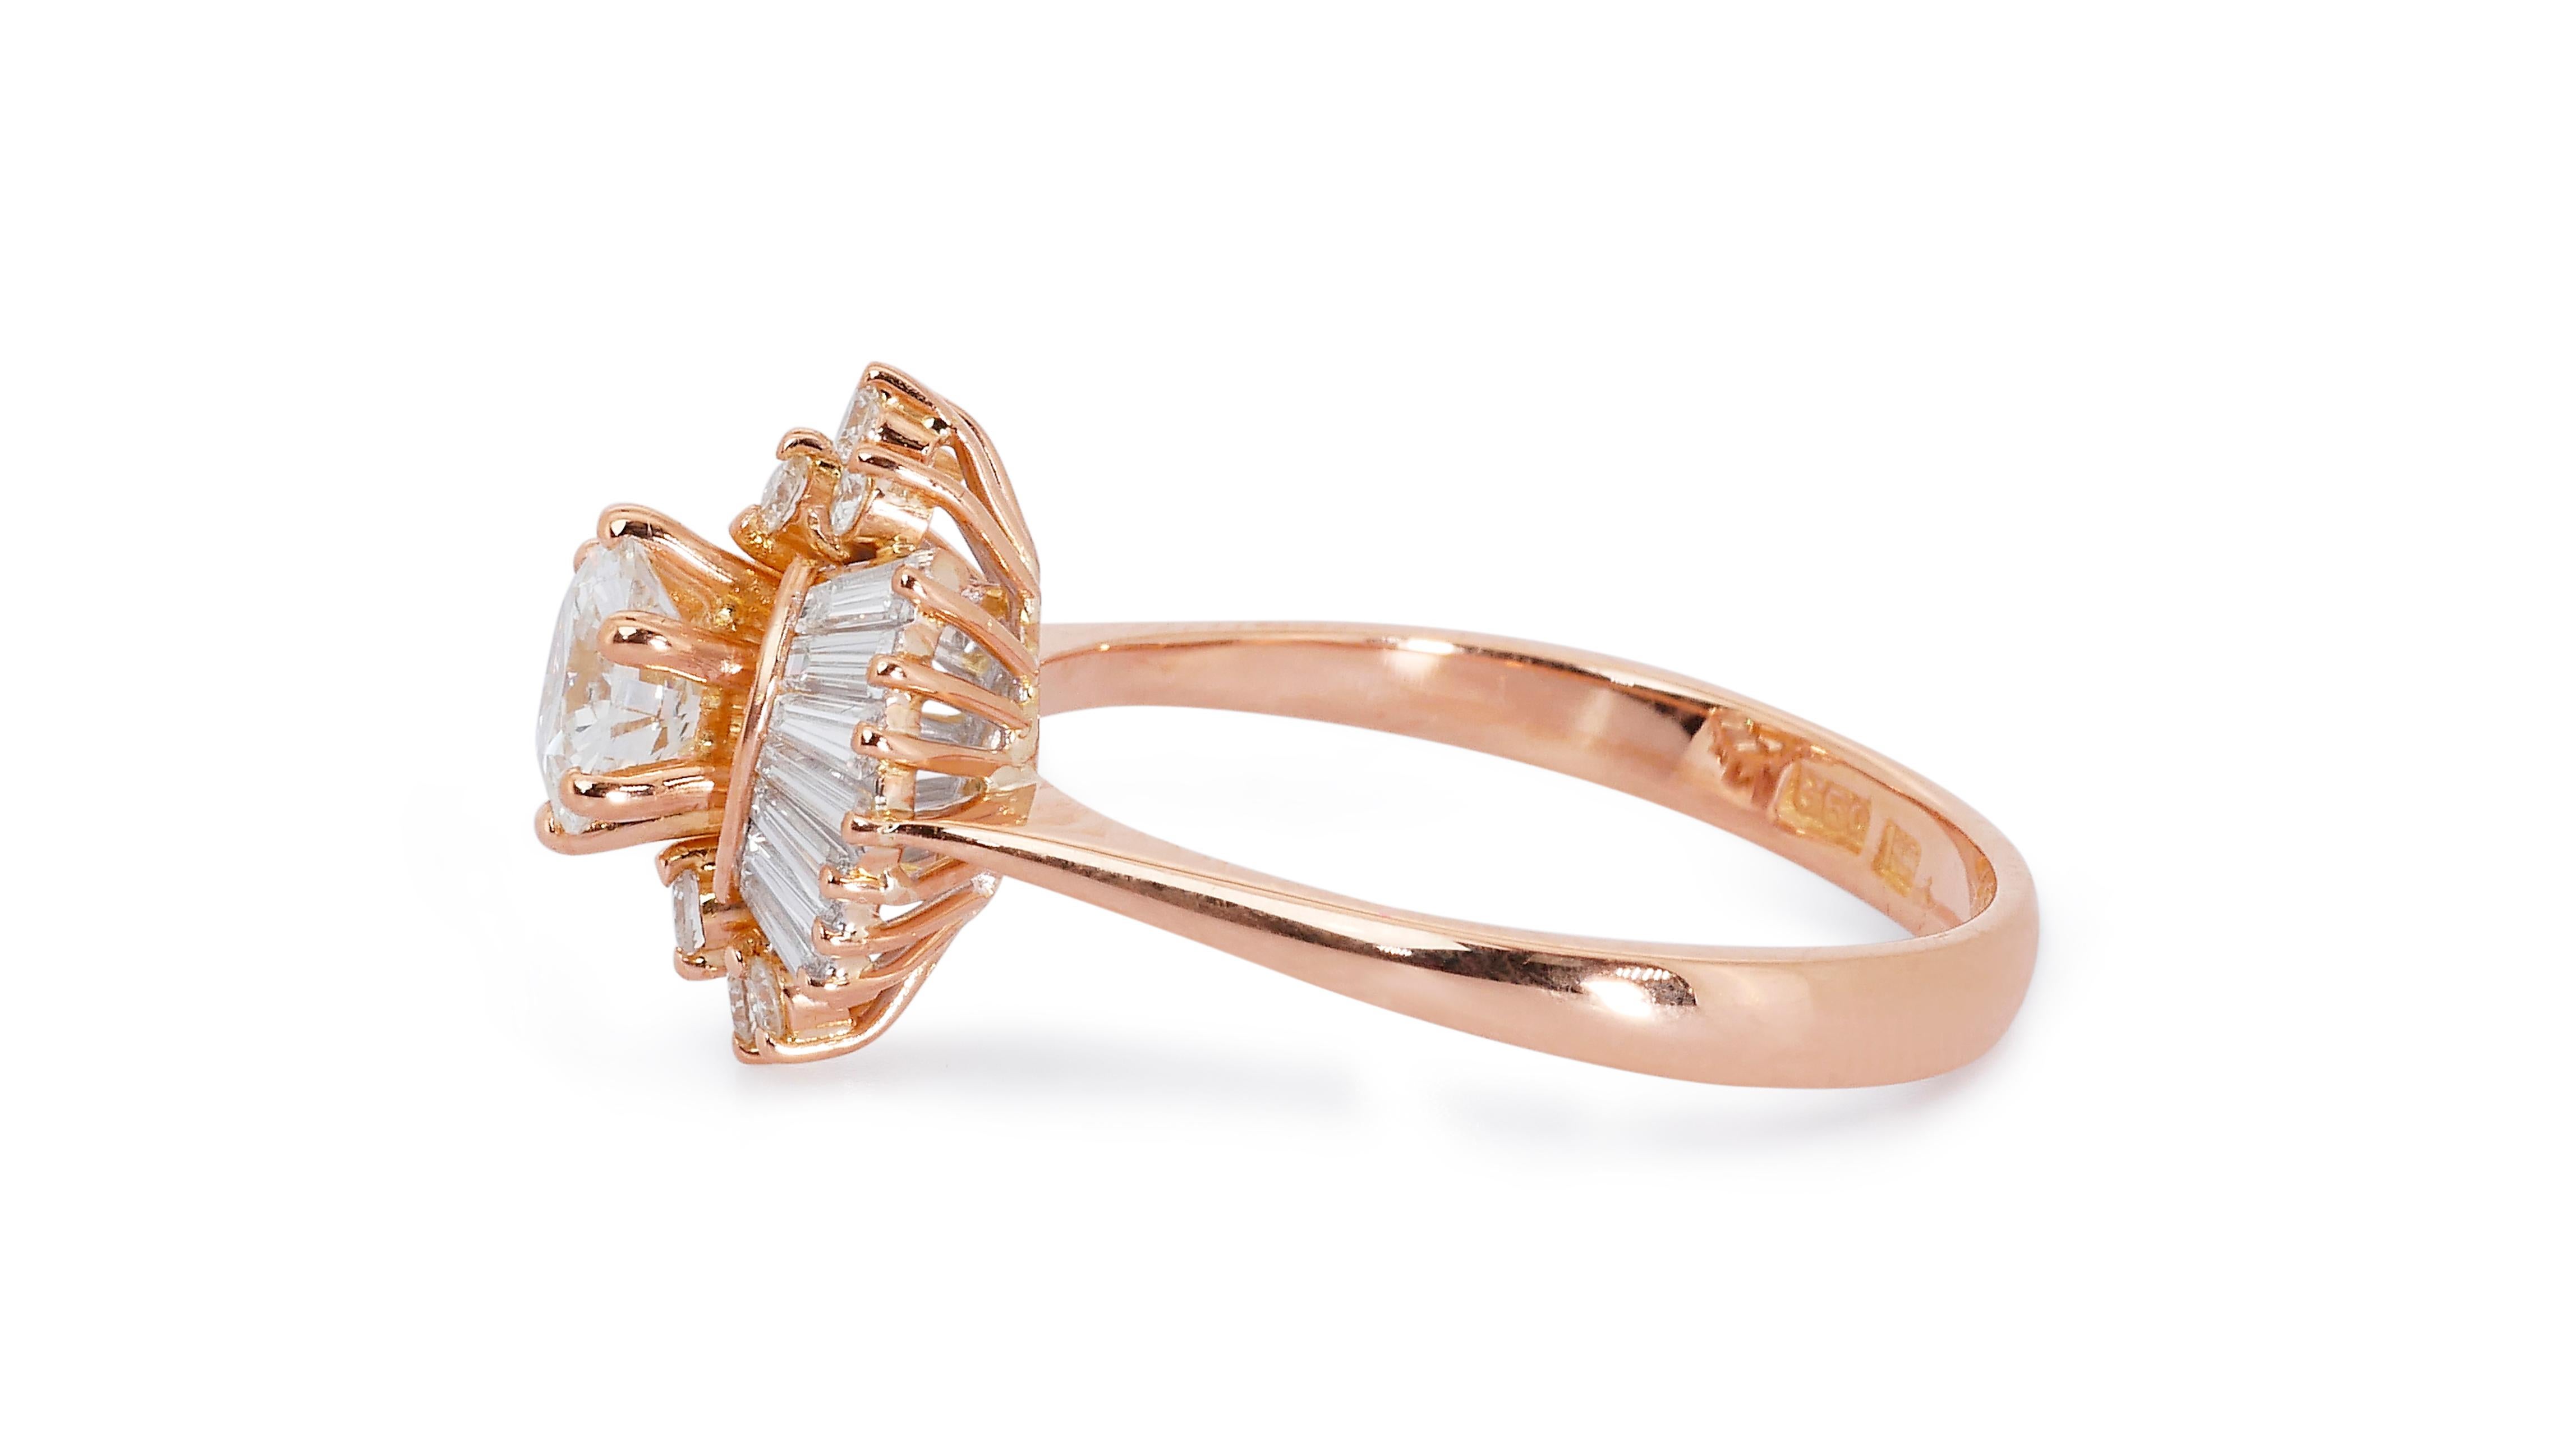 Marvelous 14k Rose Gold Ring w/ 1.46 Carat Natural Diamonds GIA Certificate For Sale 4